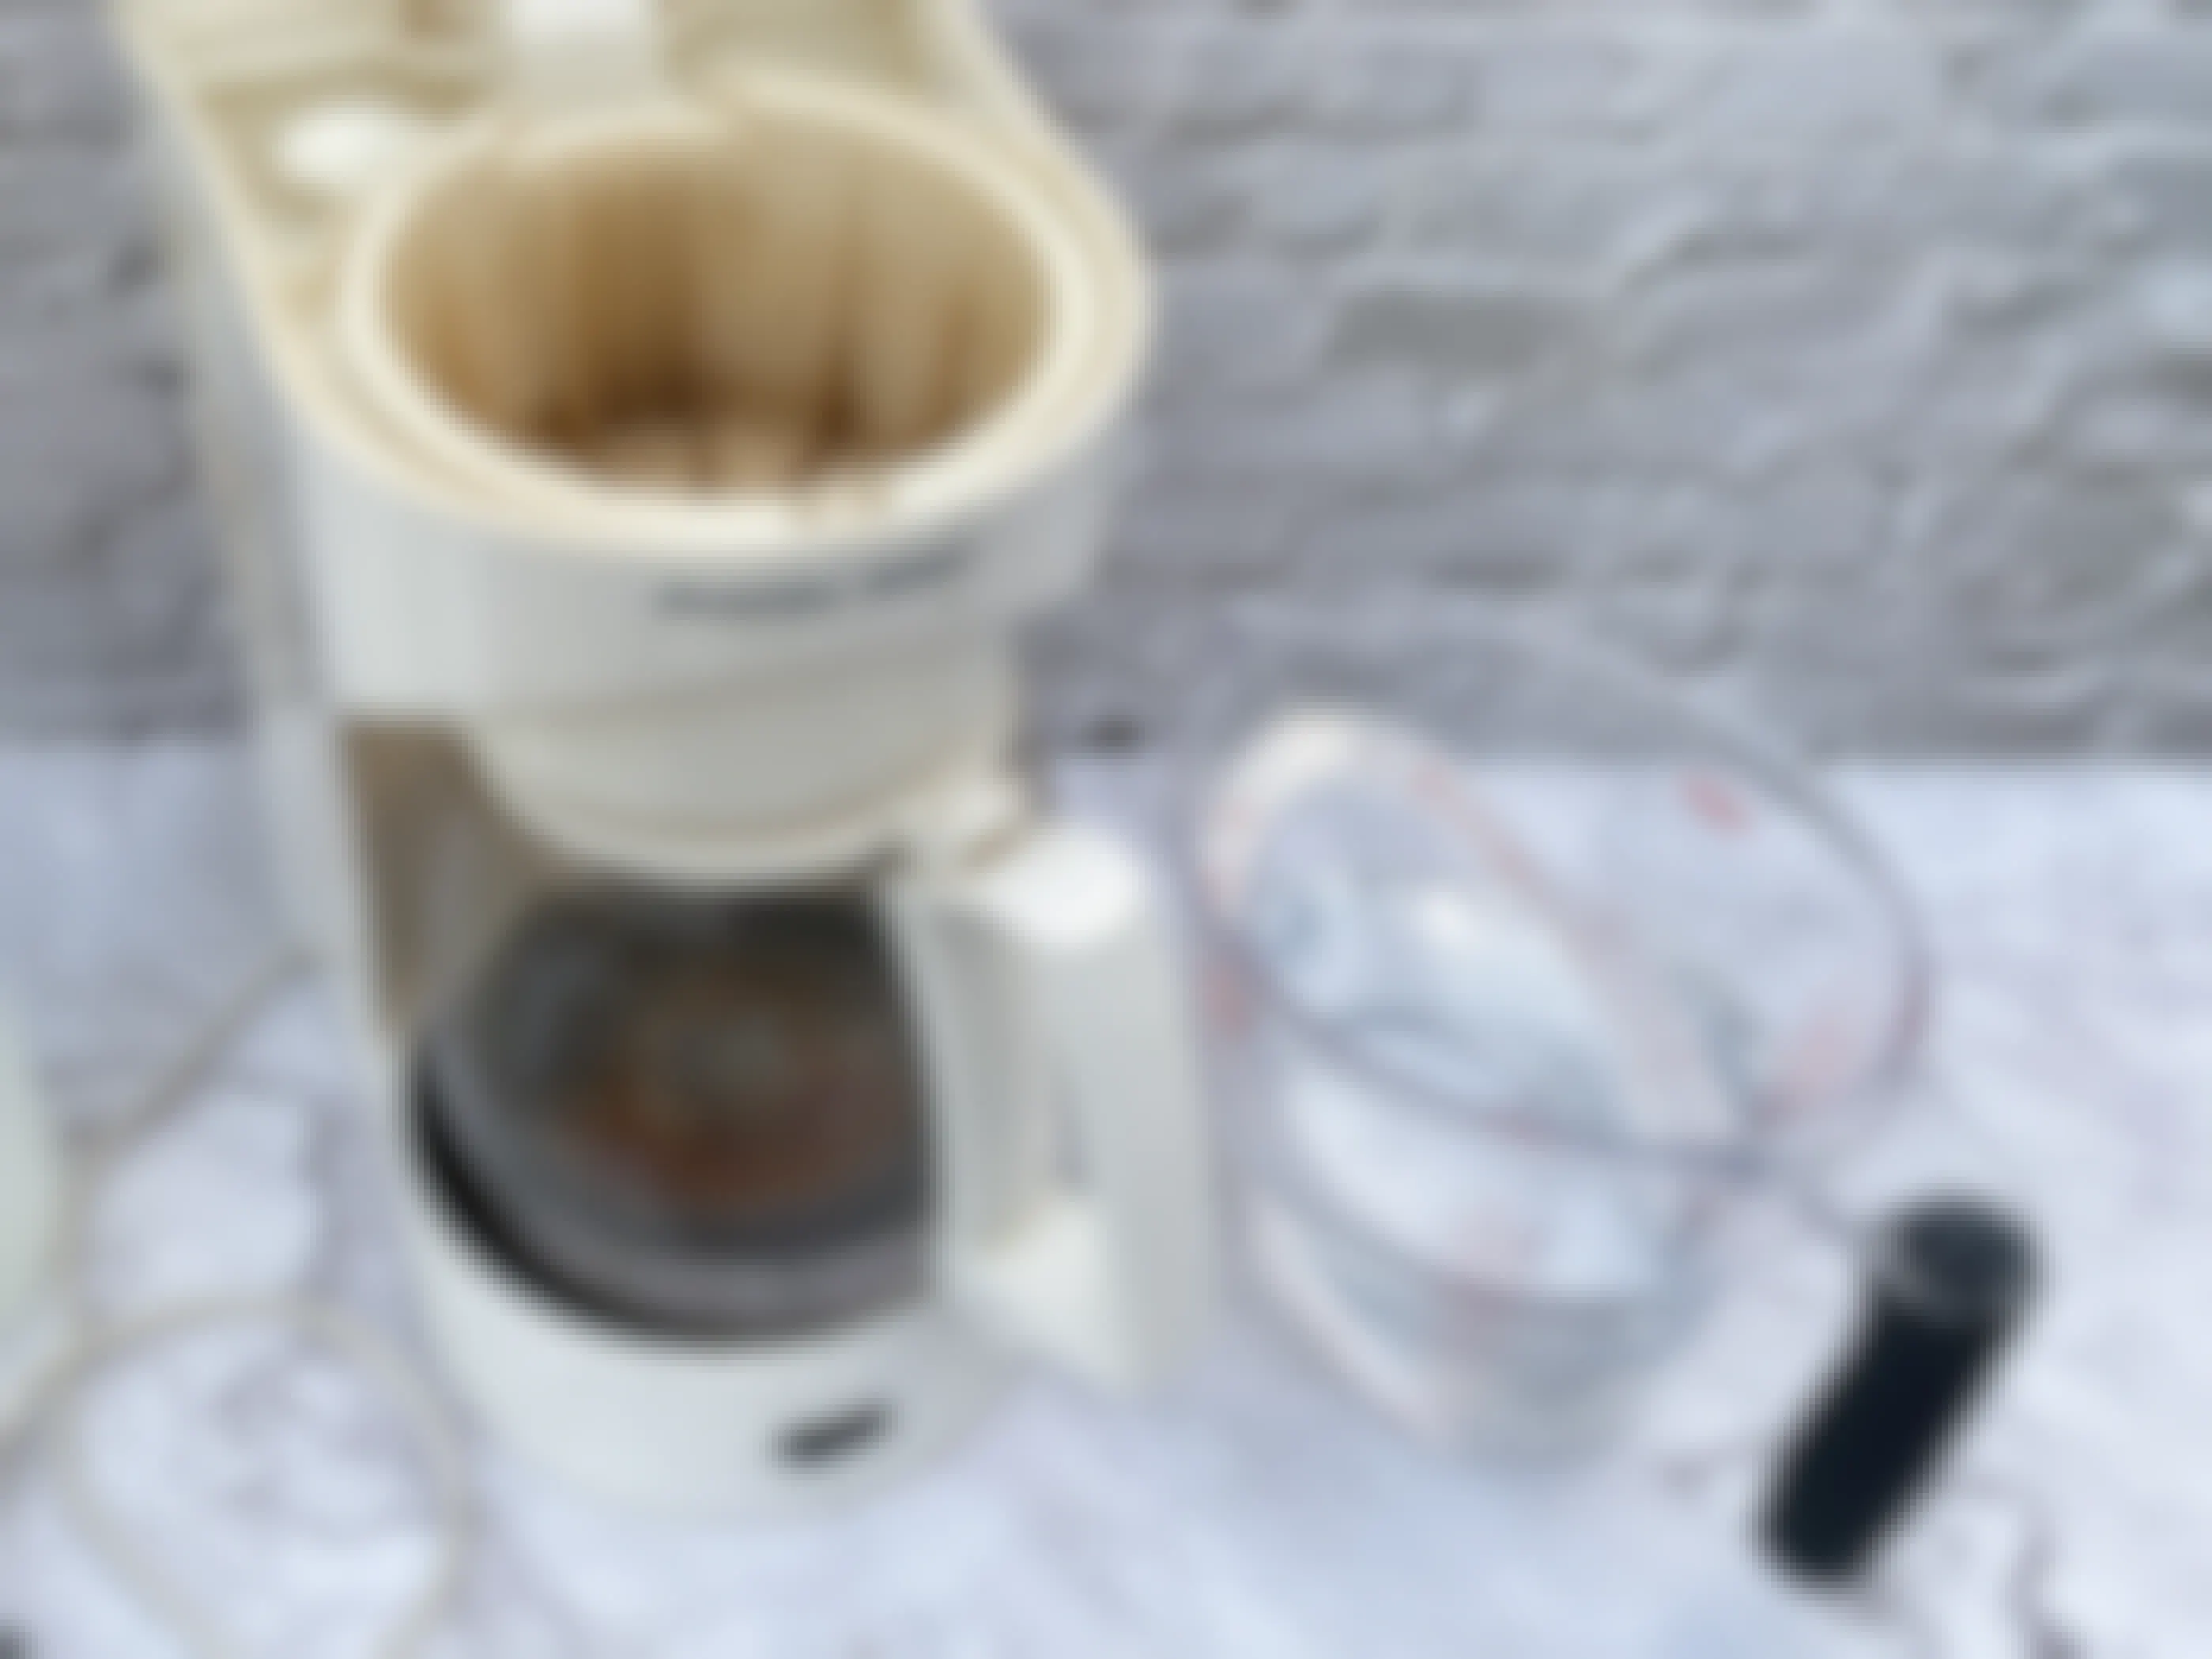 A coffee maker in need of cleaning on a counter next to a measuring cup of a water and vinegar mixture